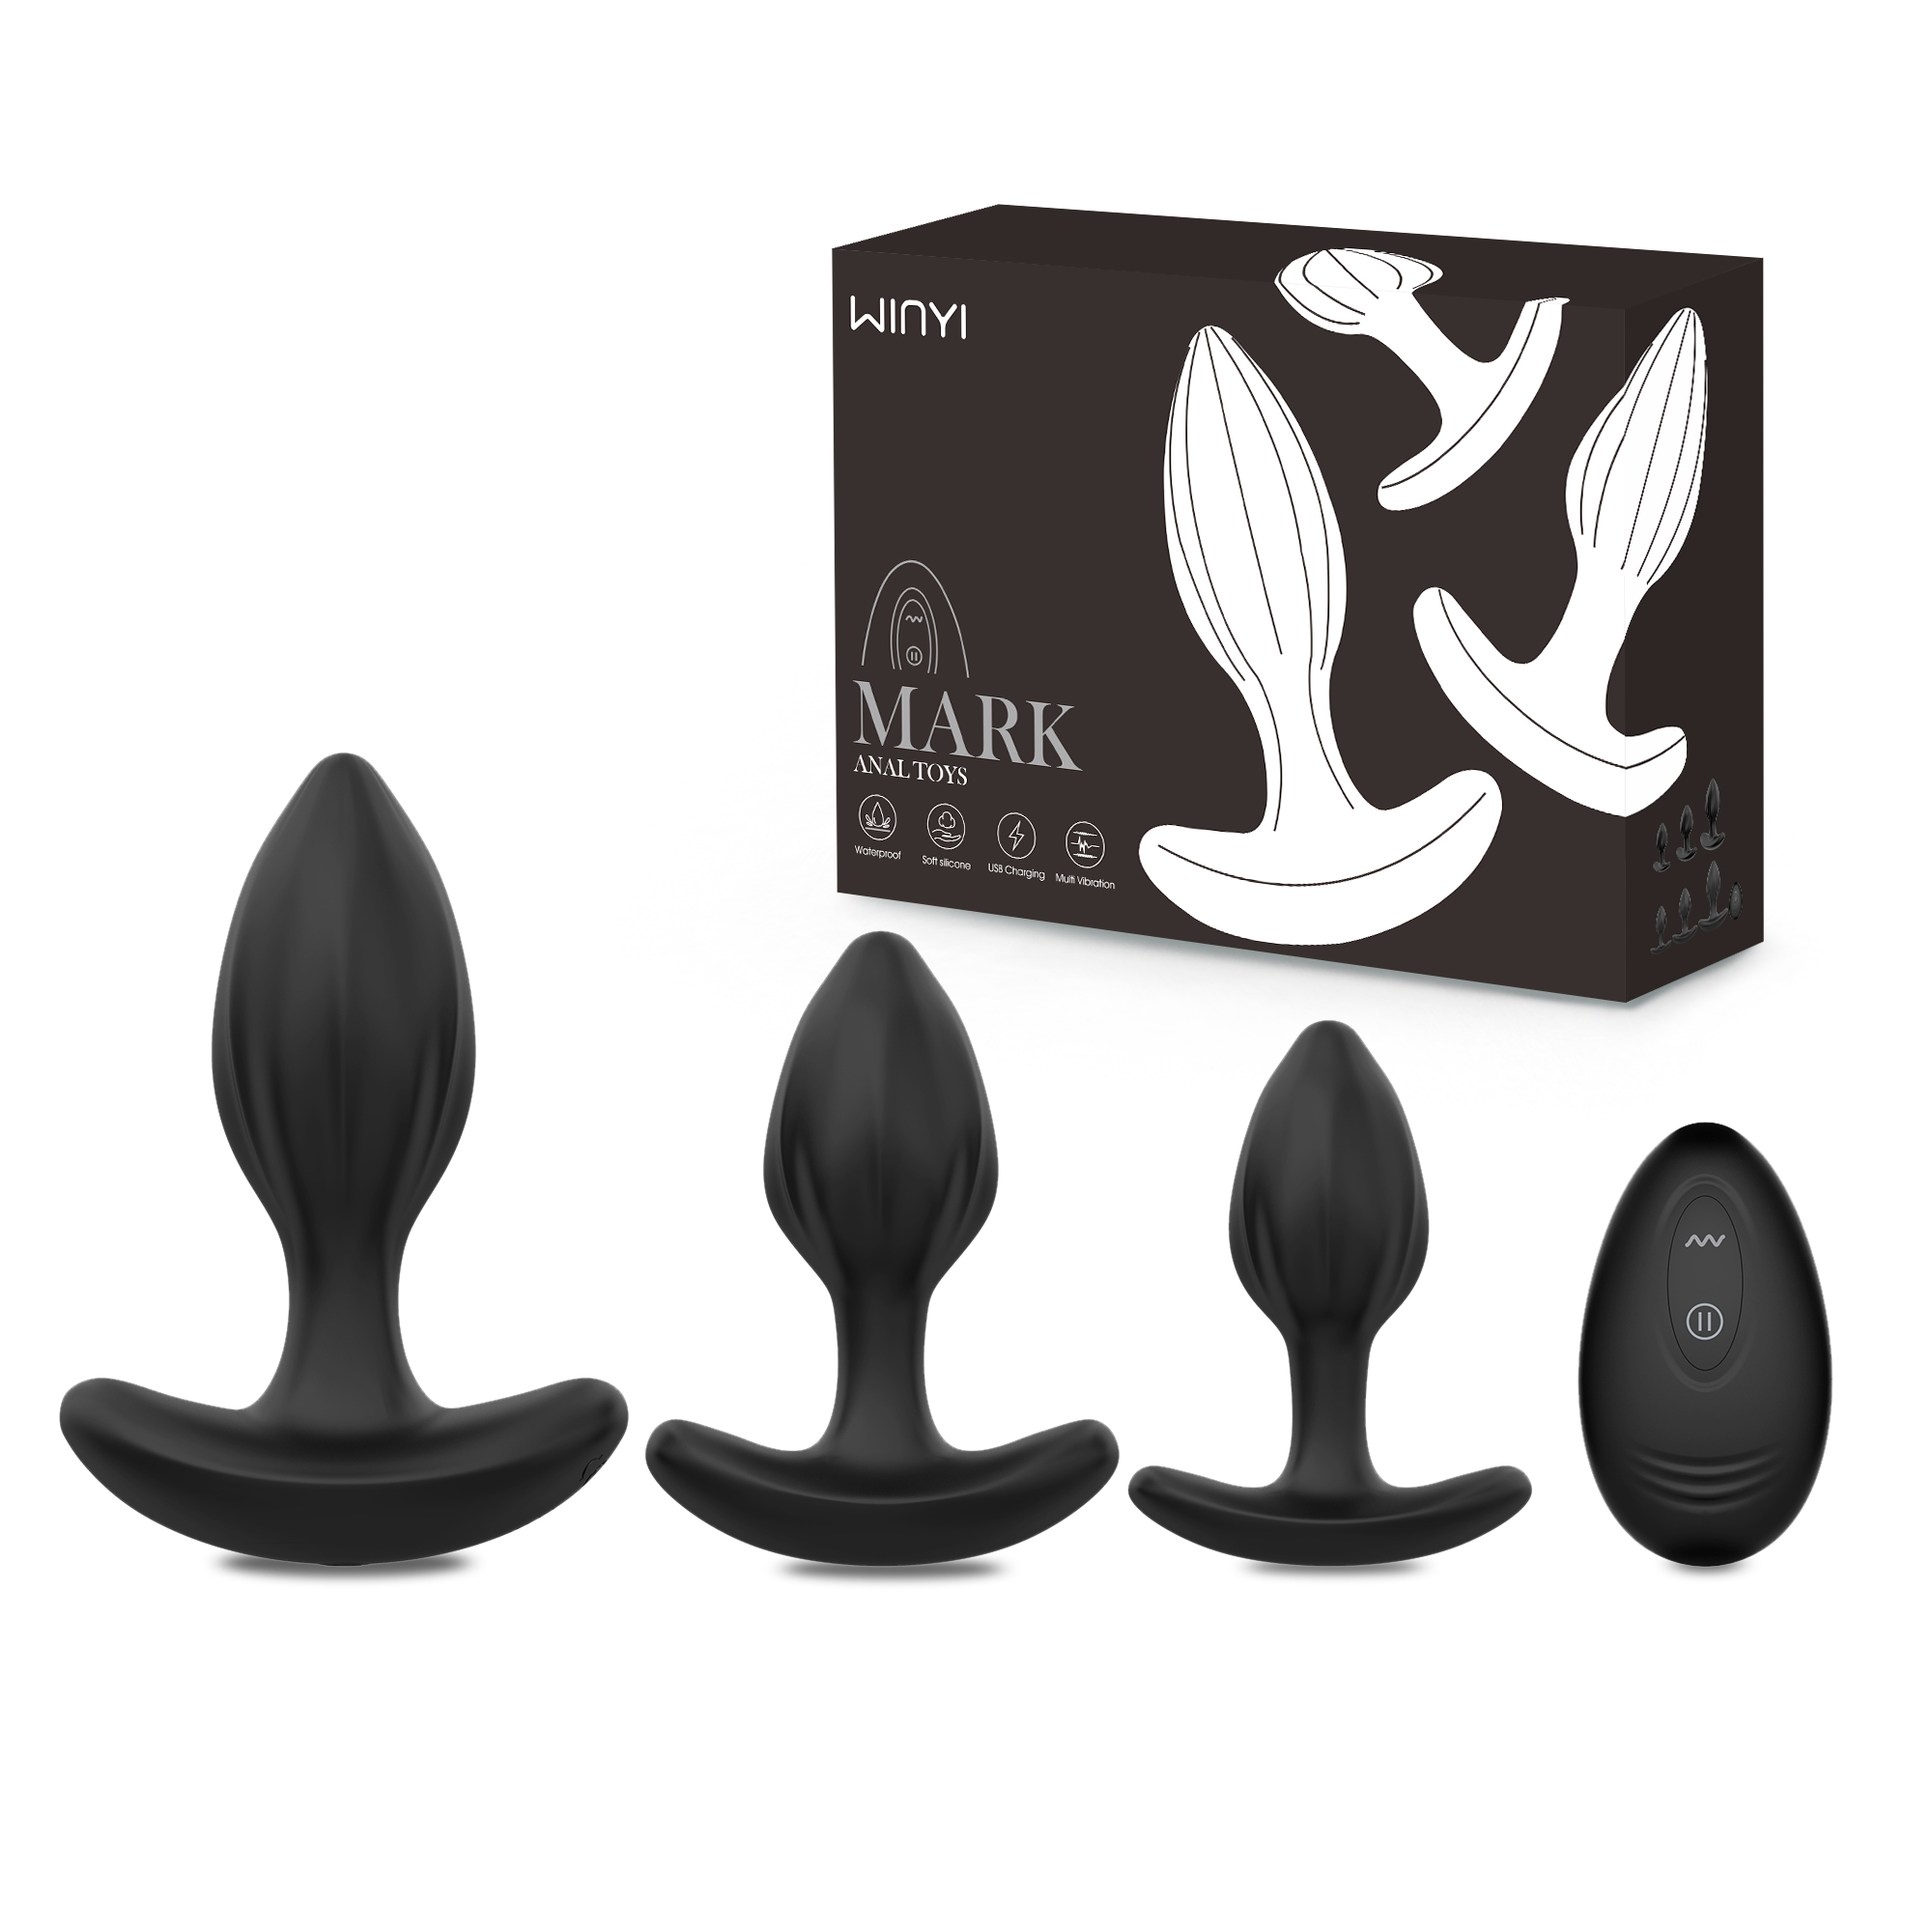 wy0587-vibrating anal plug kit with new sex toy packaging-intimate toy Vendor-OEM ODM service available factory-Wide Range Of Quality Products-Industry-trusted Vendor-Private Label full customization-WINYI-Official Websiteszwinyi.com/winyi.net